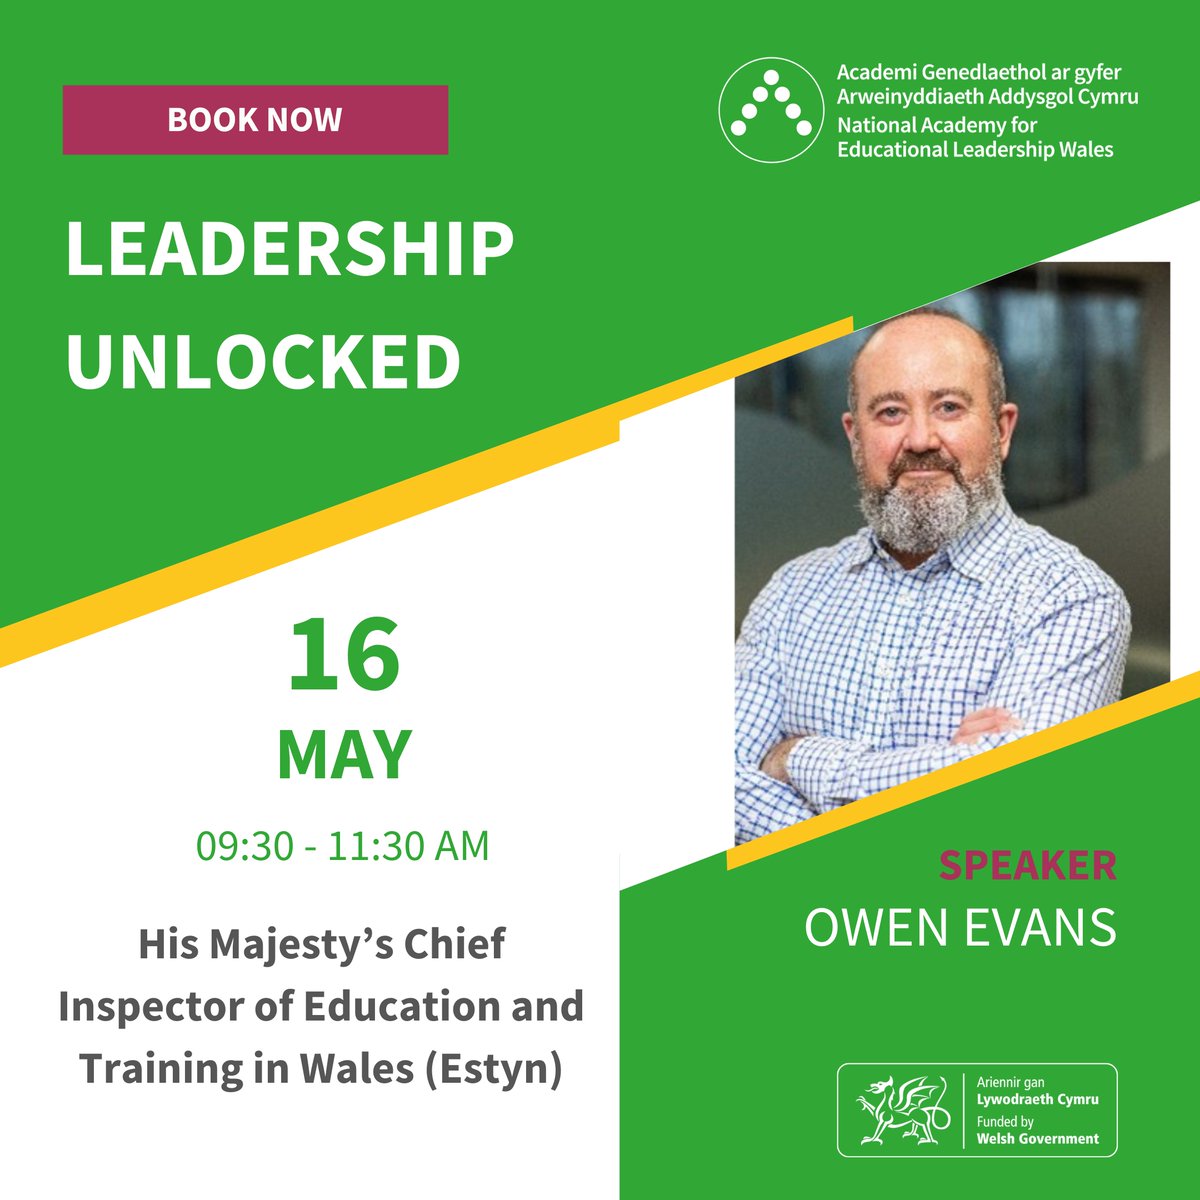 Join the #LeadershipAcademy on Thursday 16 May for our latest #LeadershipUnlocked webinar with Owen Evans, His Majesty's Chief Inspector of Education and Training in Wales. For more information, and to book, visit ow.ly/MyU350RiN8w @EstynHMI @WG_Education @OwenEvansEstyn